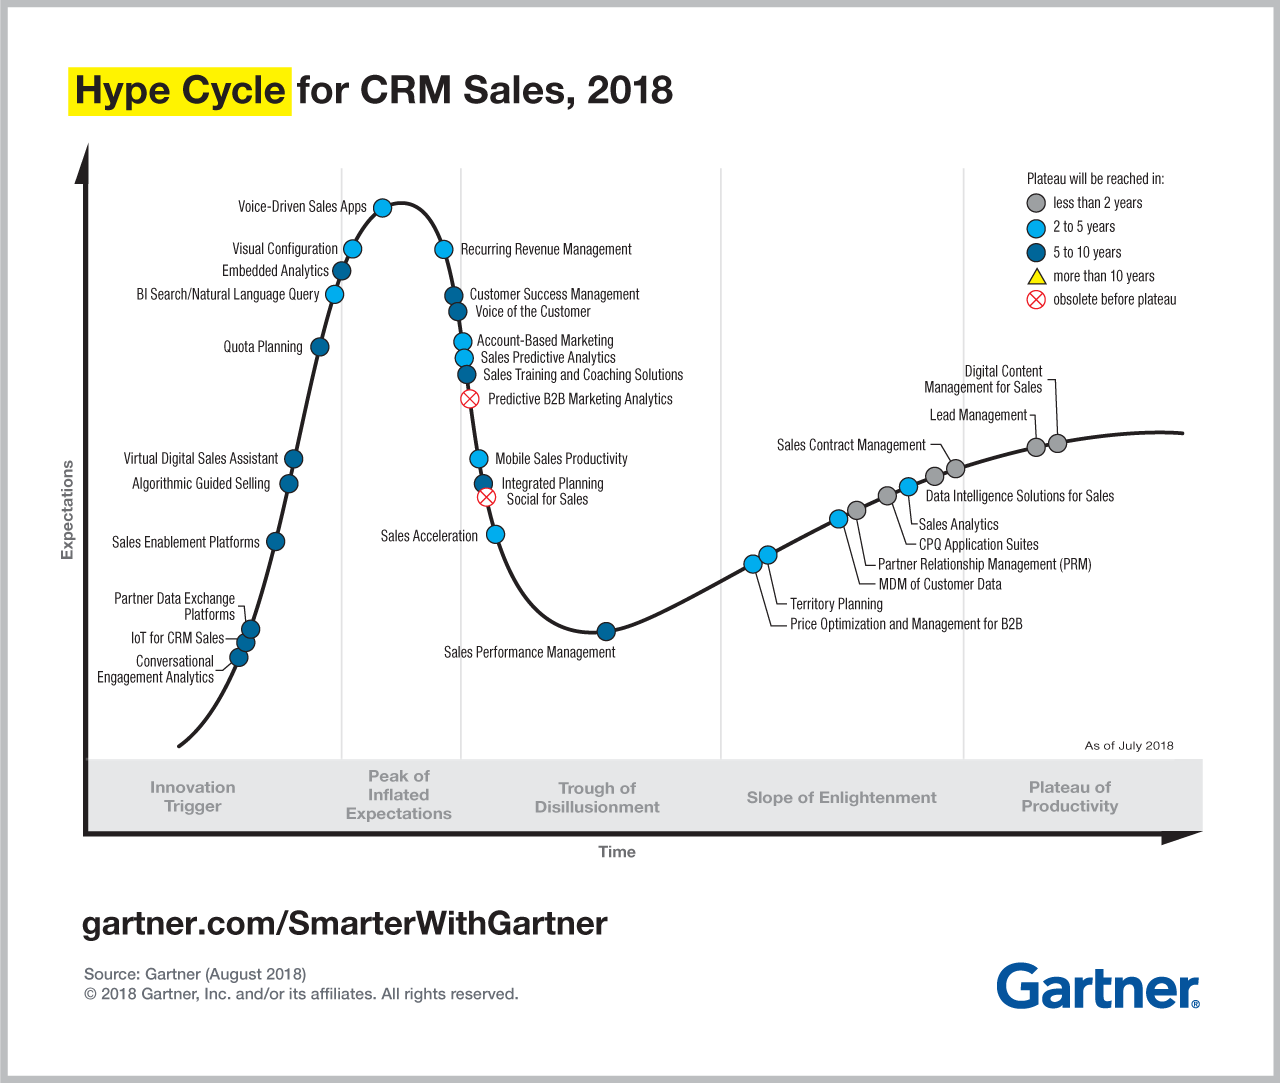 The Gartner Hype Cycle for CRM Sales, 2018